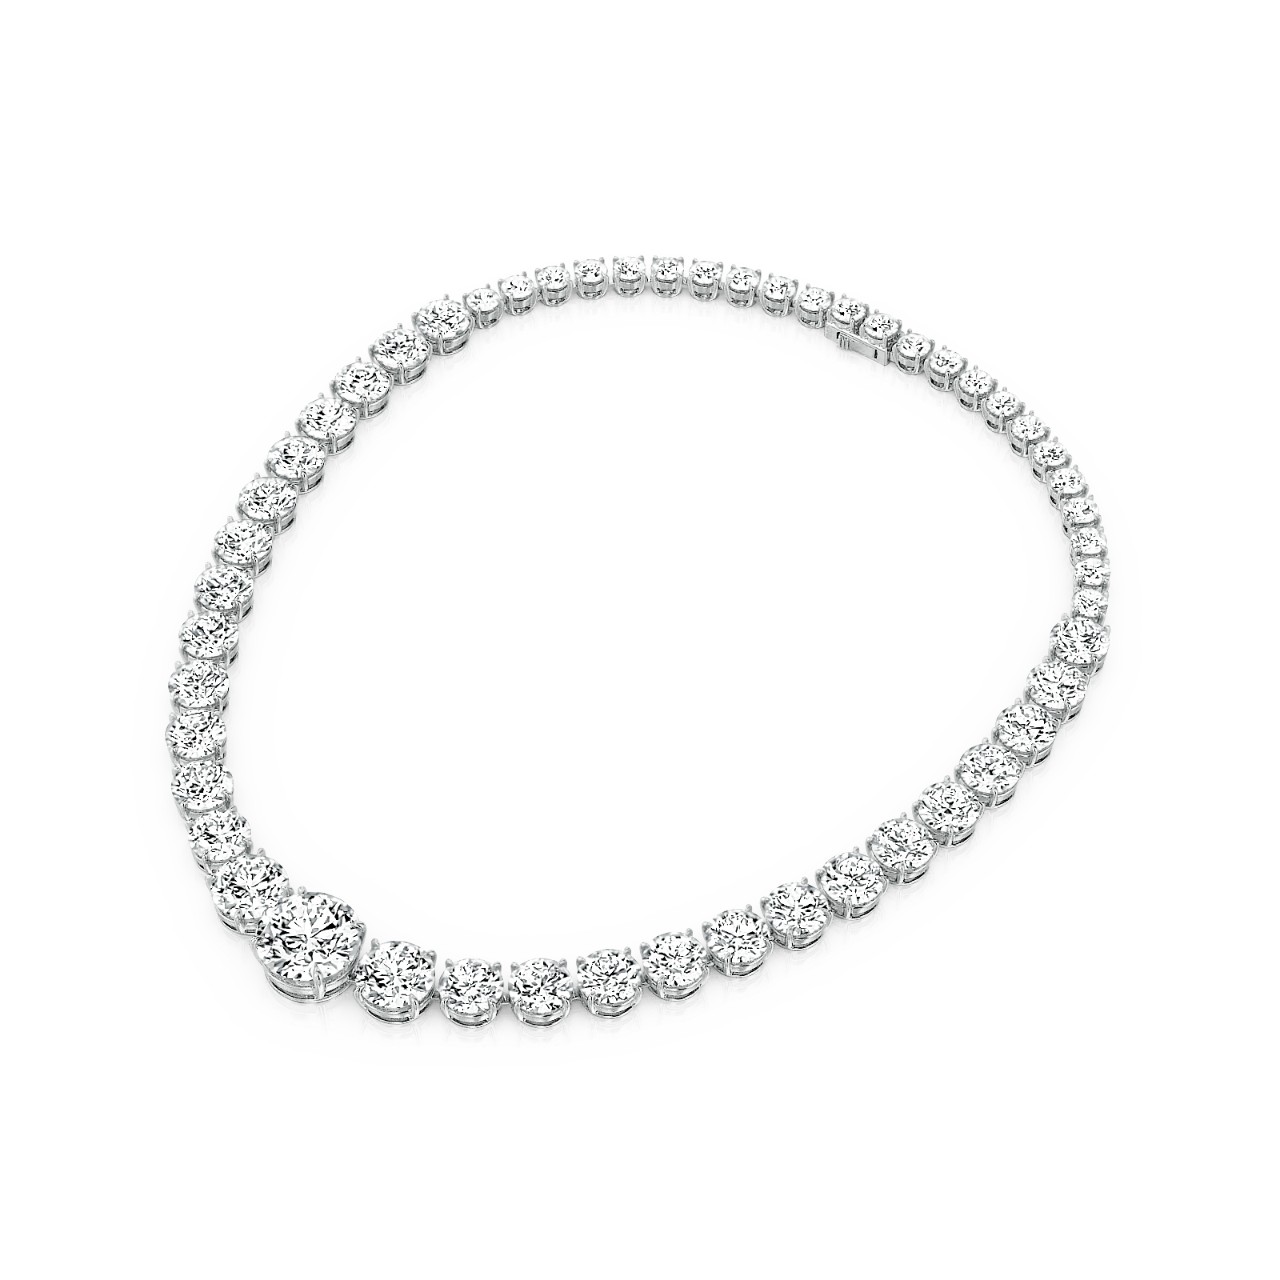 Women's Luxury Round Cut Necklace in White Gold - Helloice Jewelry